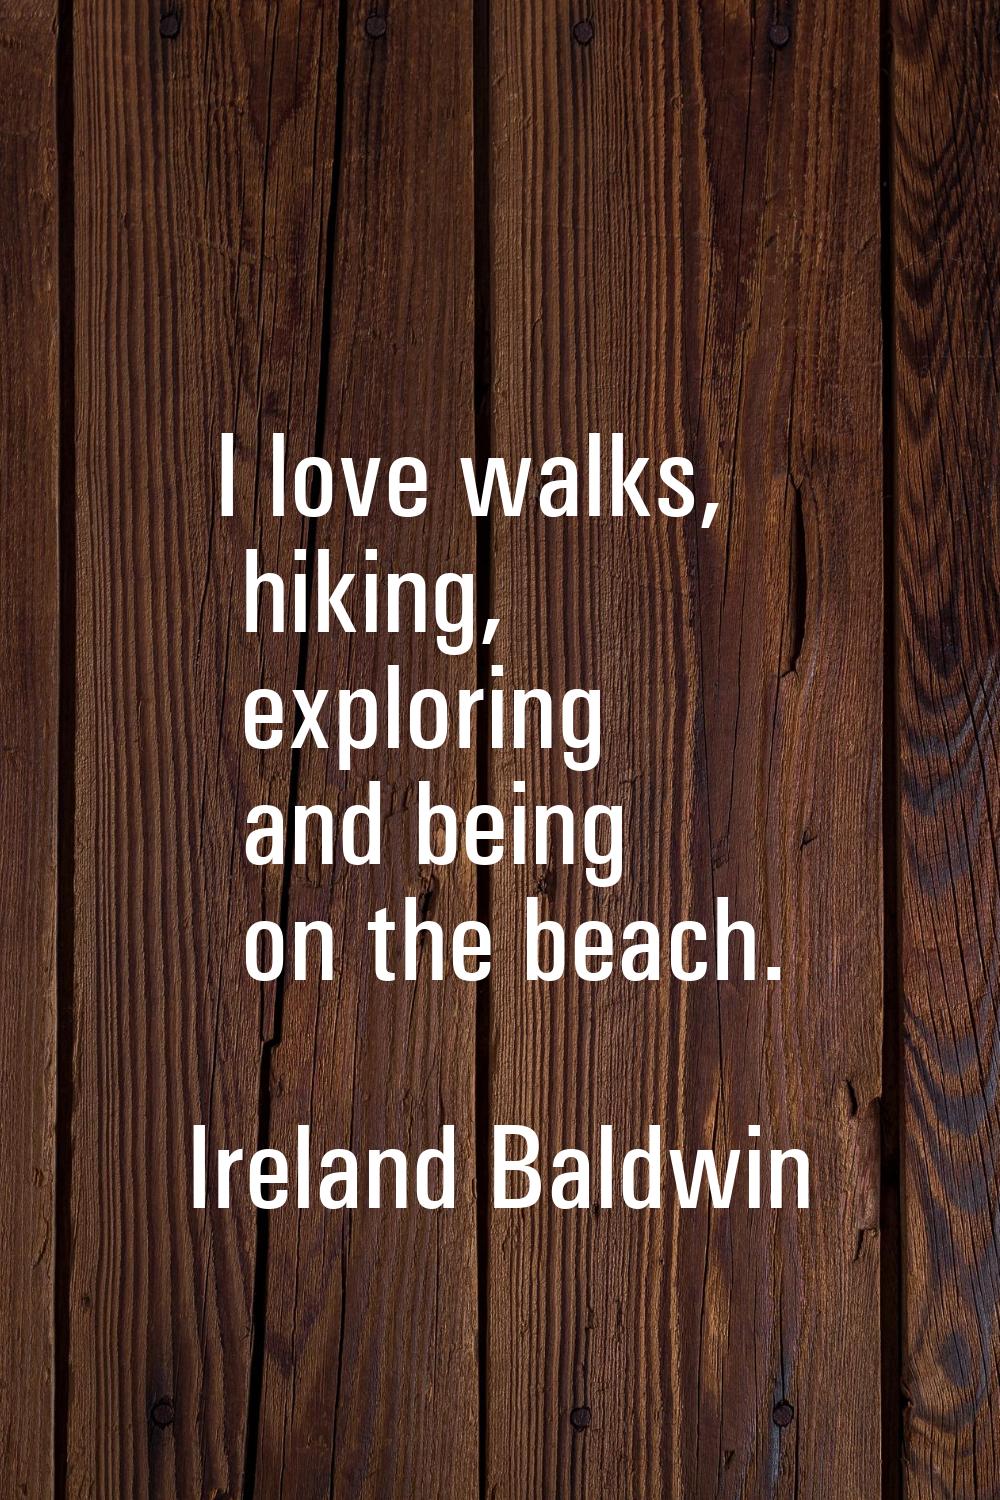 I love walks, hiking, exploring and being on the beach.